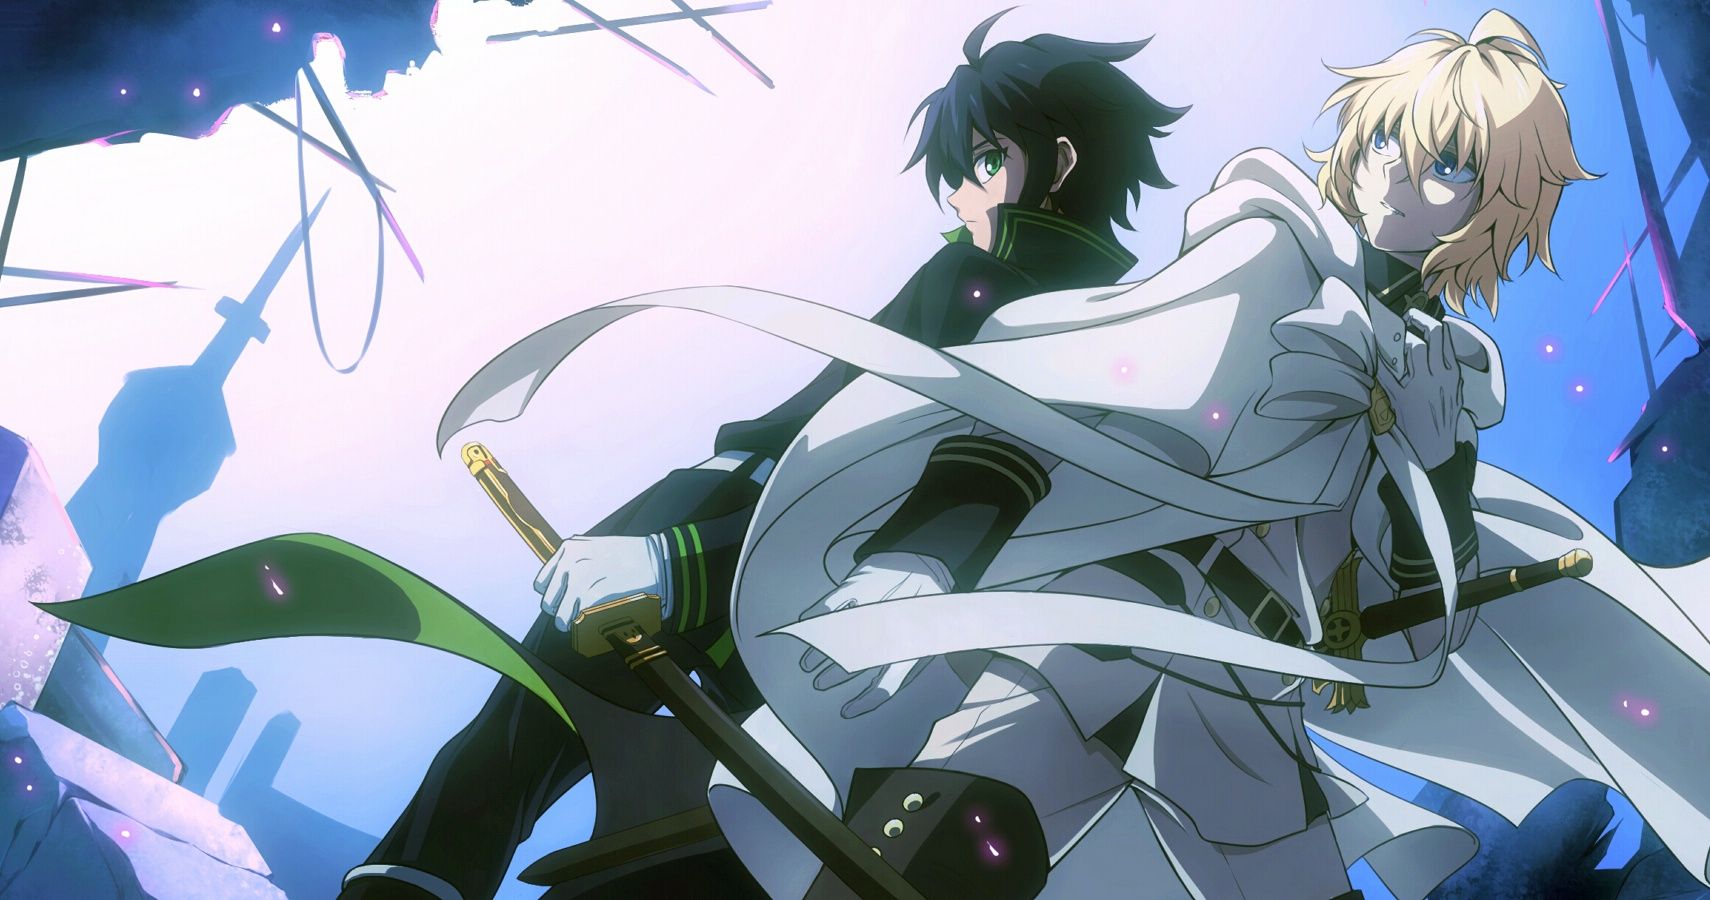 Seraph Of The End: 5 Reasons Why Mikaela Should've Been The Main